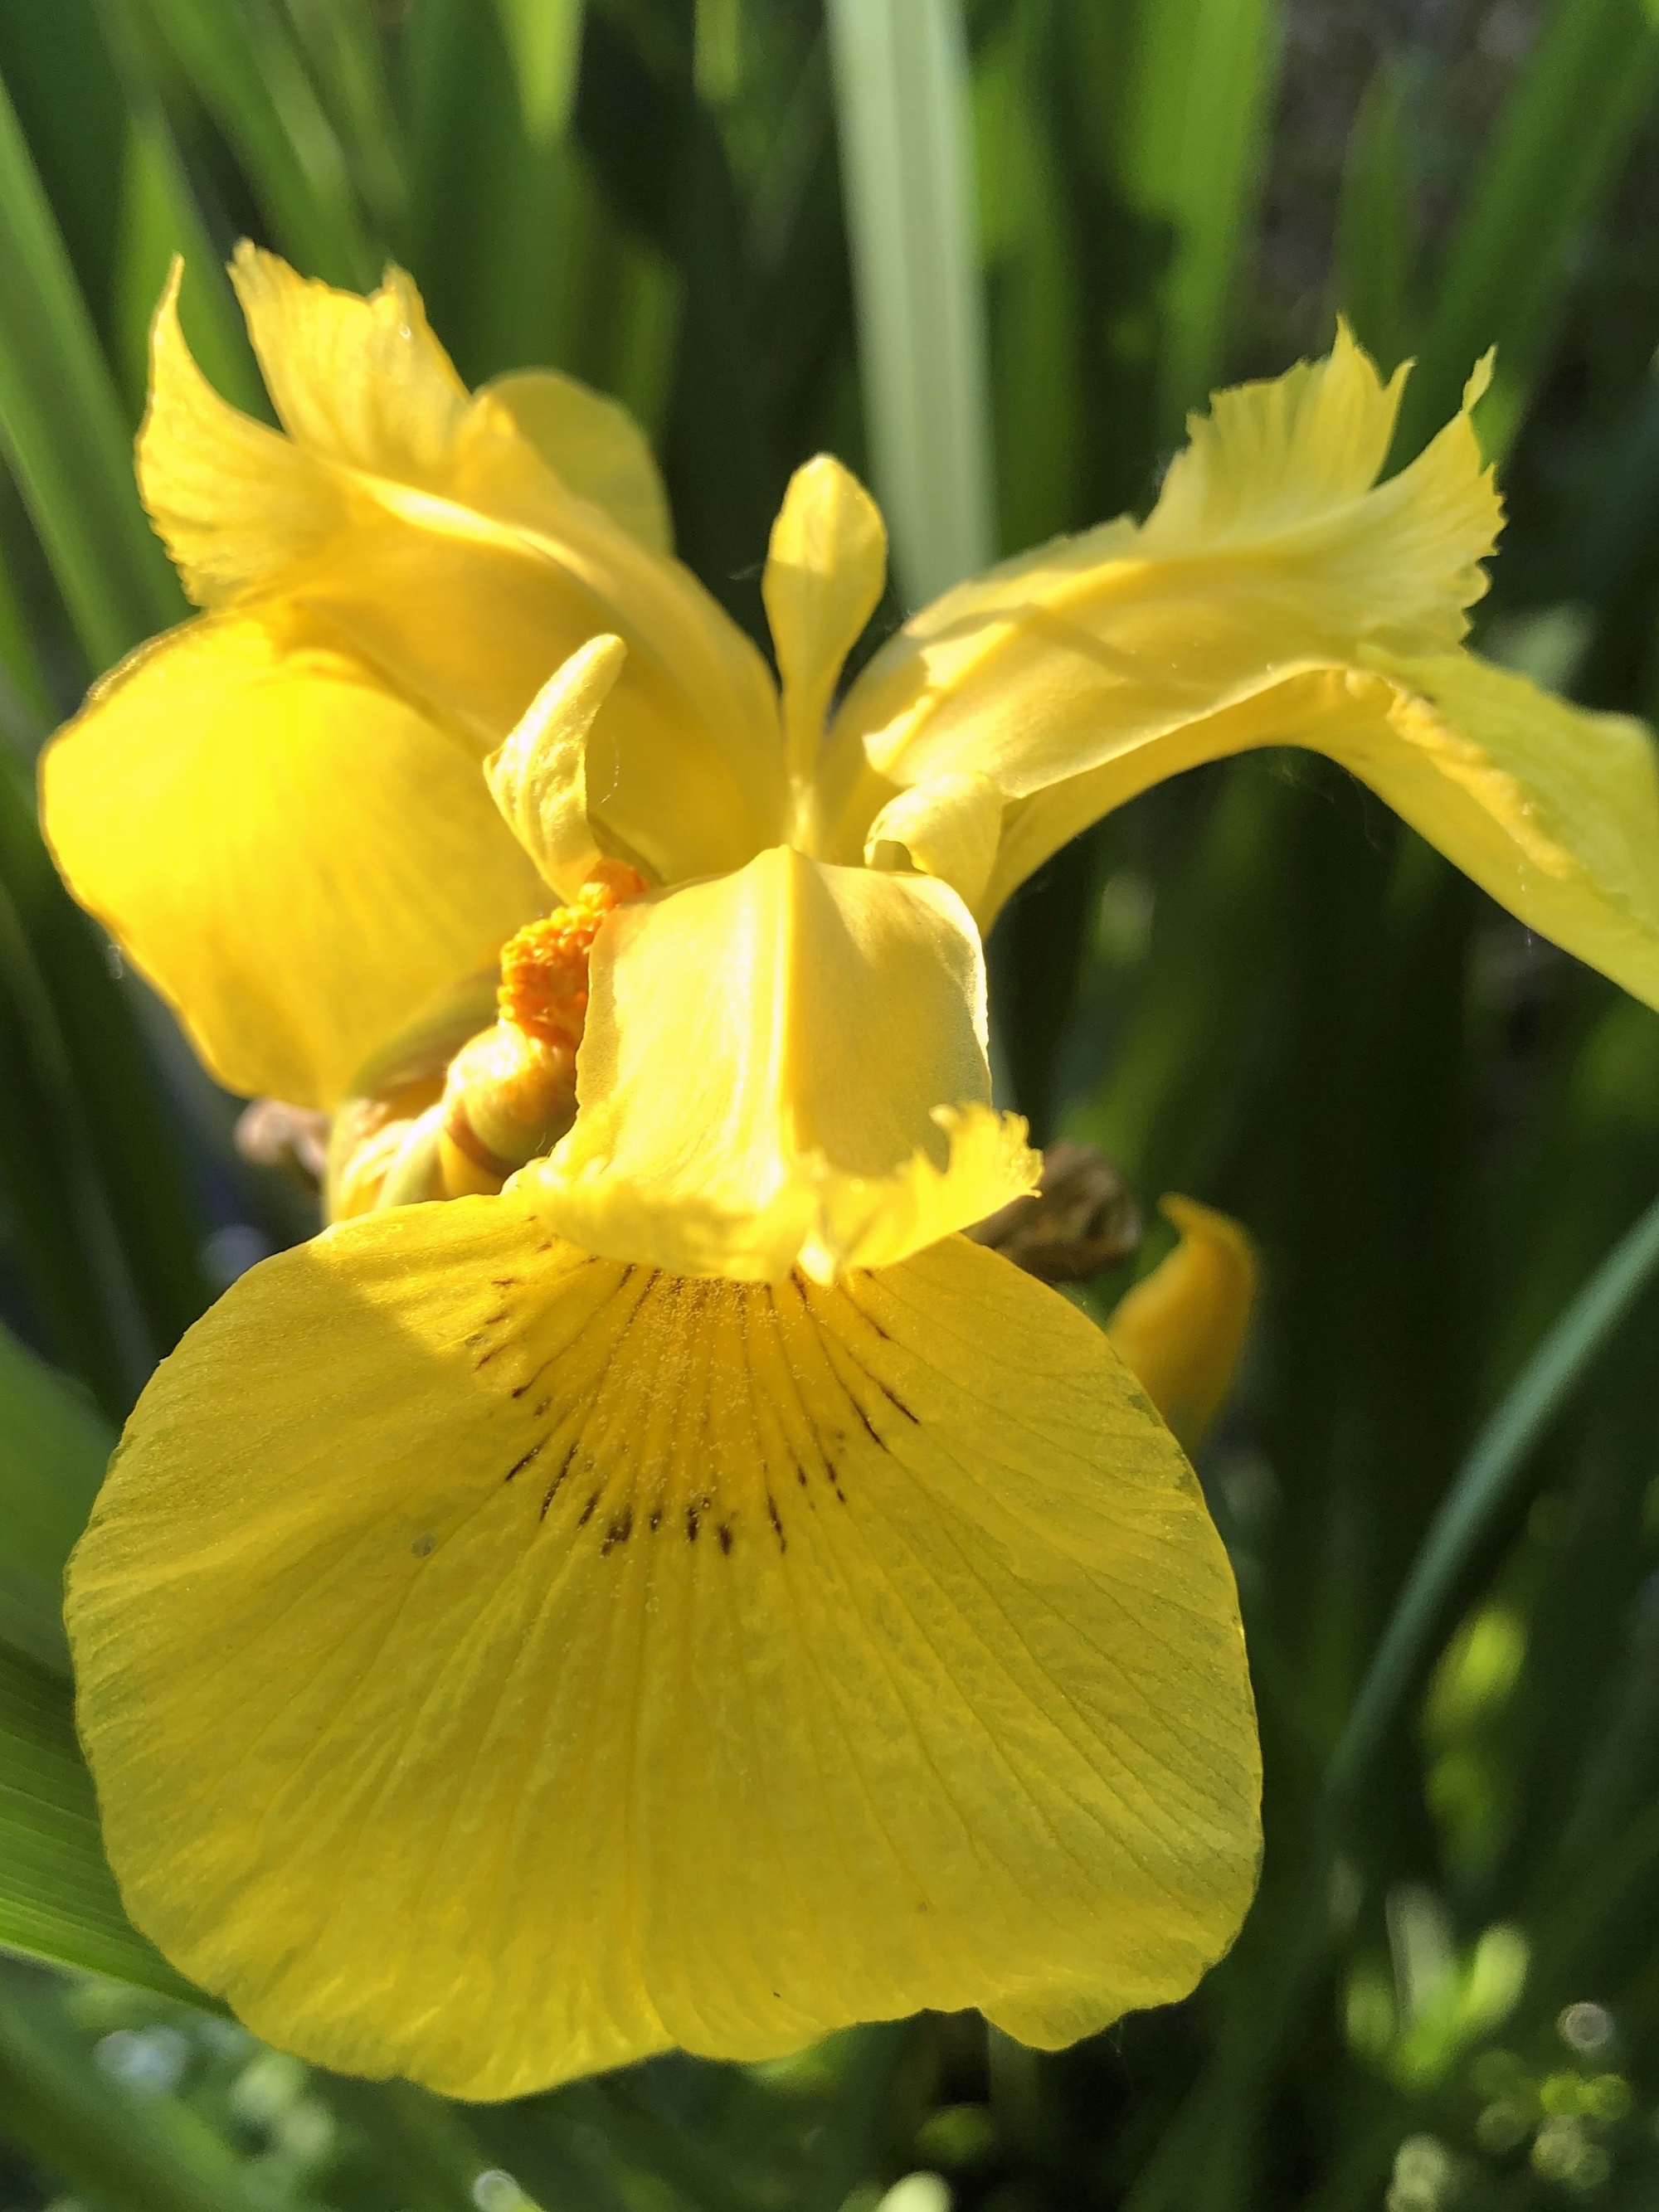 Yellow Flag Iris by Cattails on Lake Wingra on June 14, 2020.